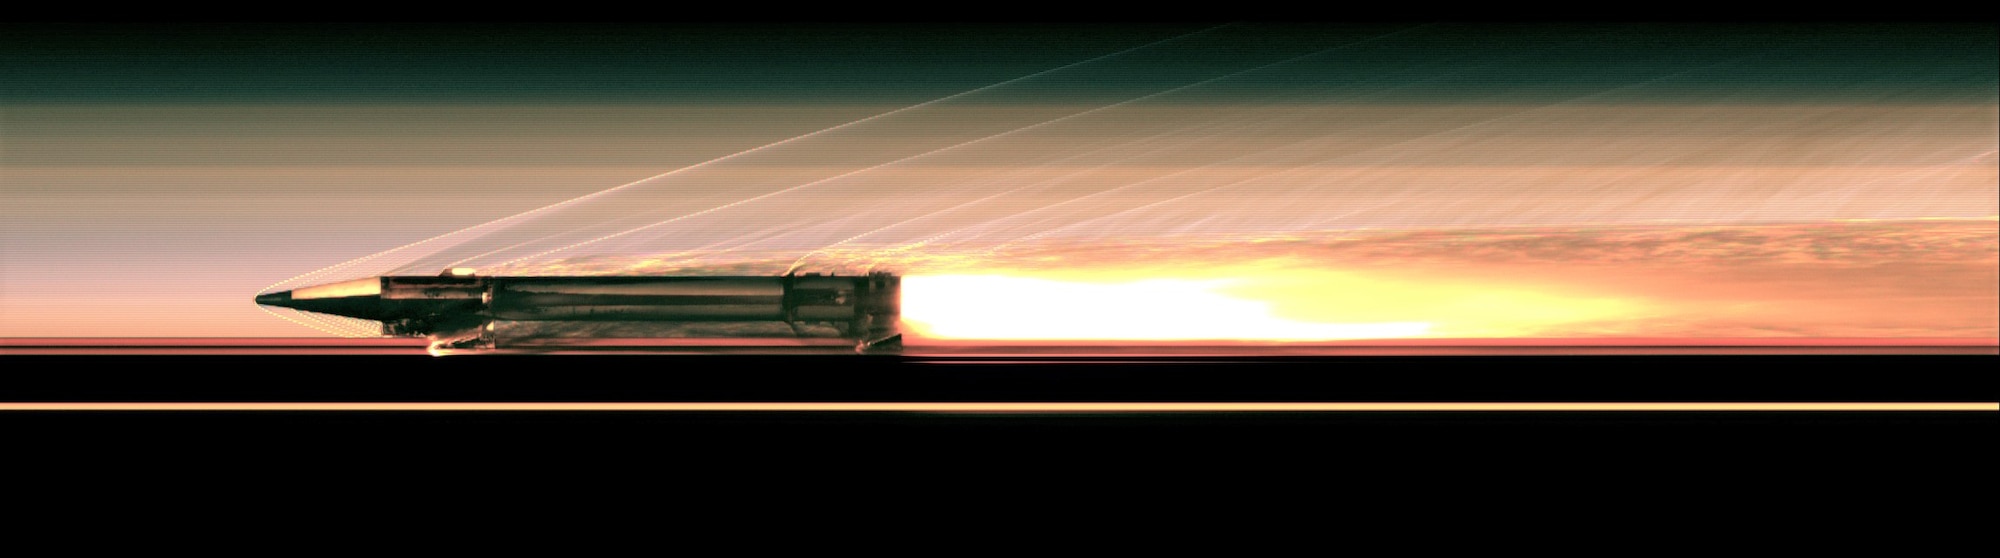 A hypersonic sled travels 5,300-feet per second on a monorail and is recovered as part of the Hypersonic Sled Recovery effort at the Arnold Engineering Development Complex High Speed Test Track at Holloman Air Force Base, New Mexico. Since July 2021, two tests have been conducted as part of a capability development effort to prepare for the increased need for hypersonic test and evaluation in support of the National Defense Strategy. (U.S. Air Force photo)